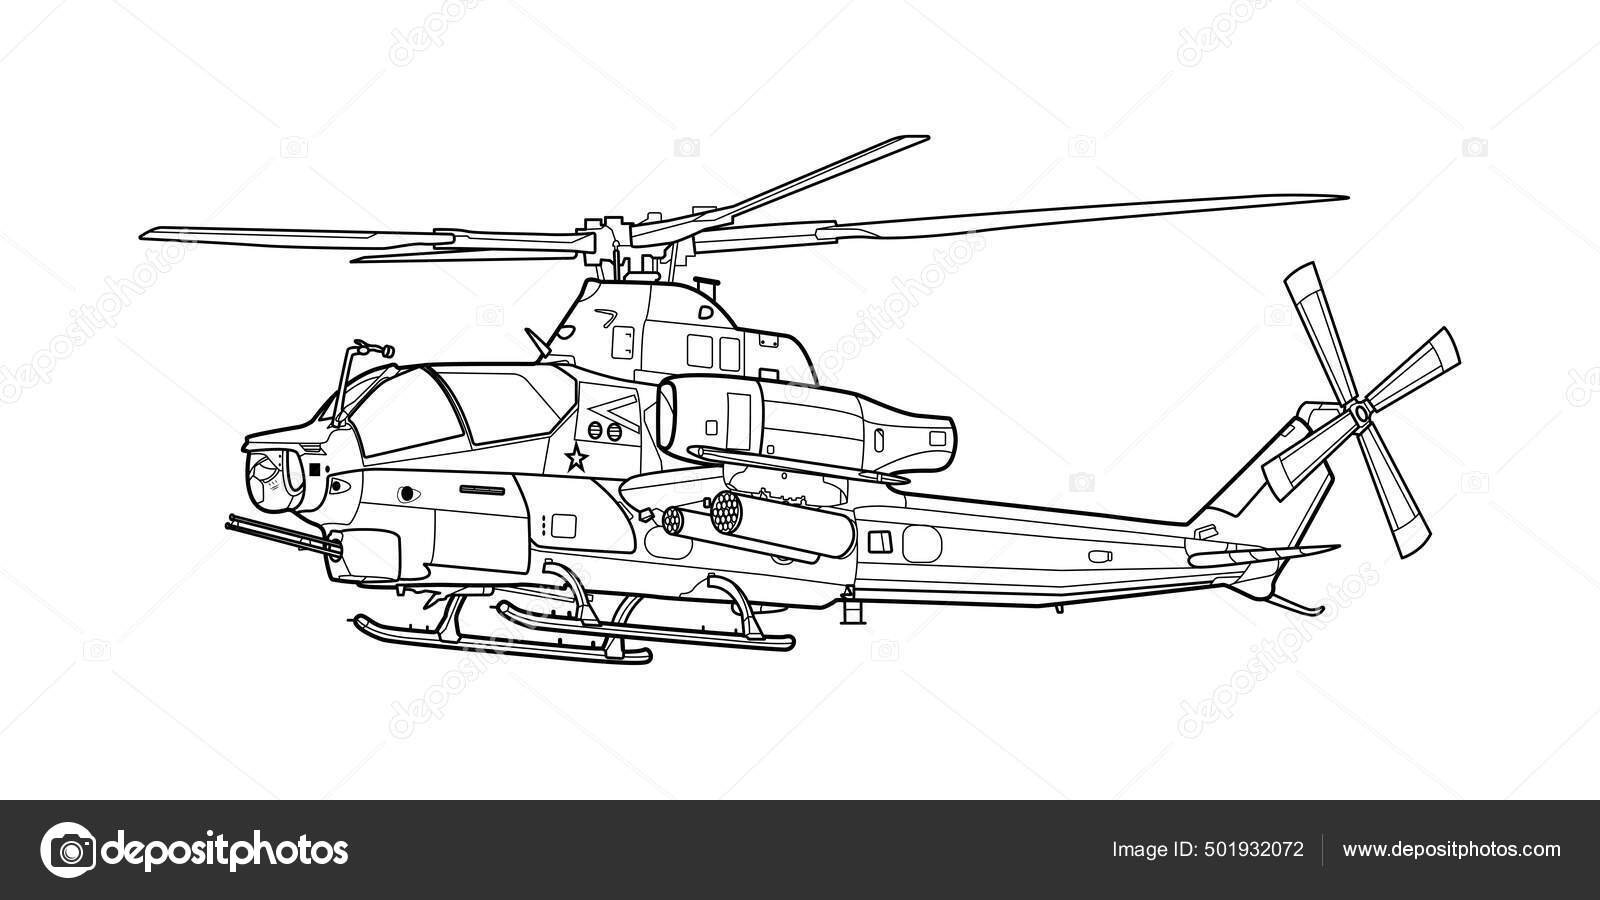 adult-military-helicopter-coloring-page-book-copter-aircraft-vector-illustration-stock-vector